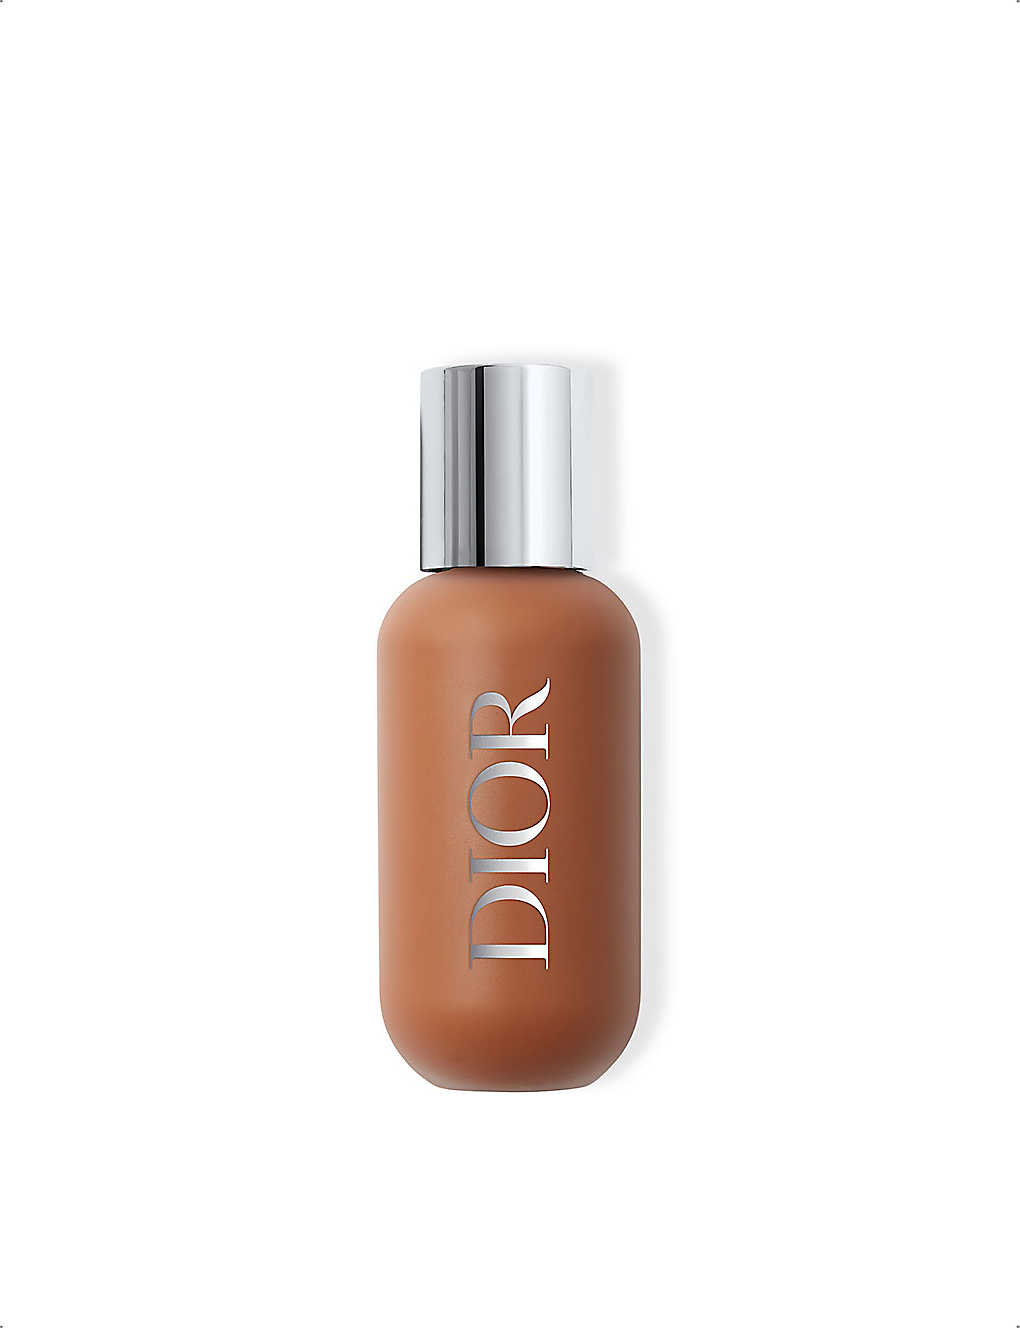 Dior Backstage Face & Body Foundation 50ml In 7w